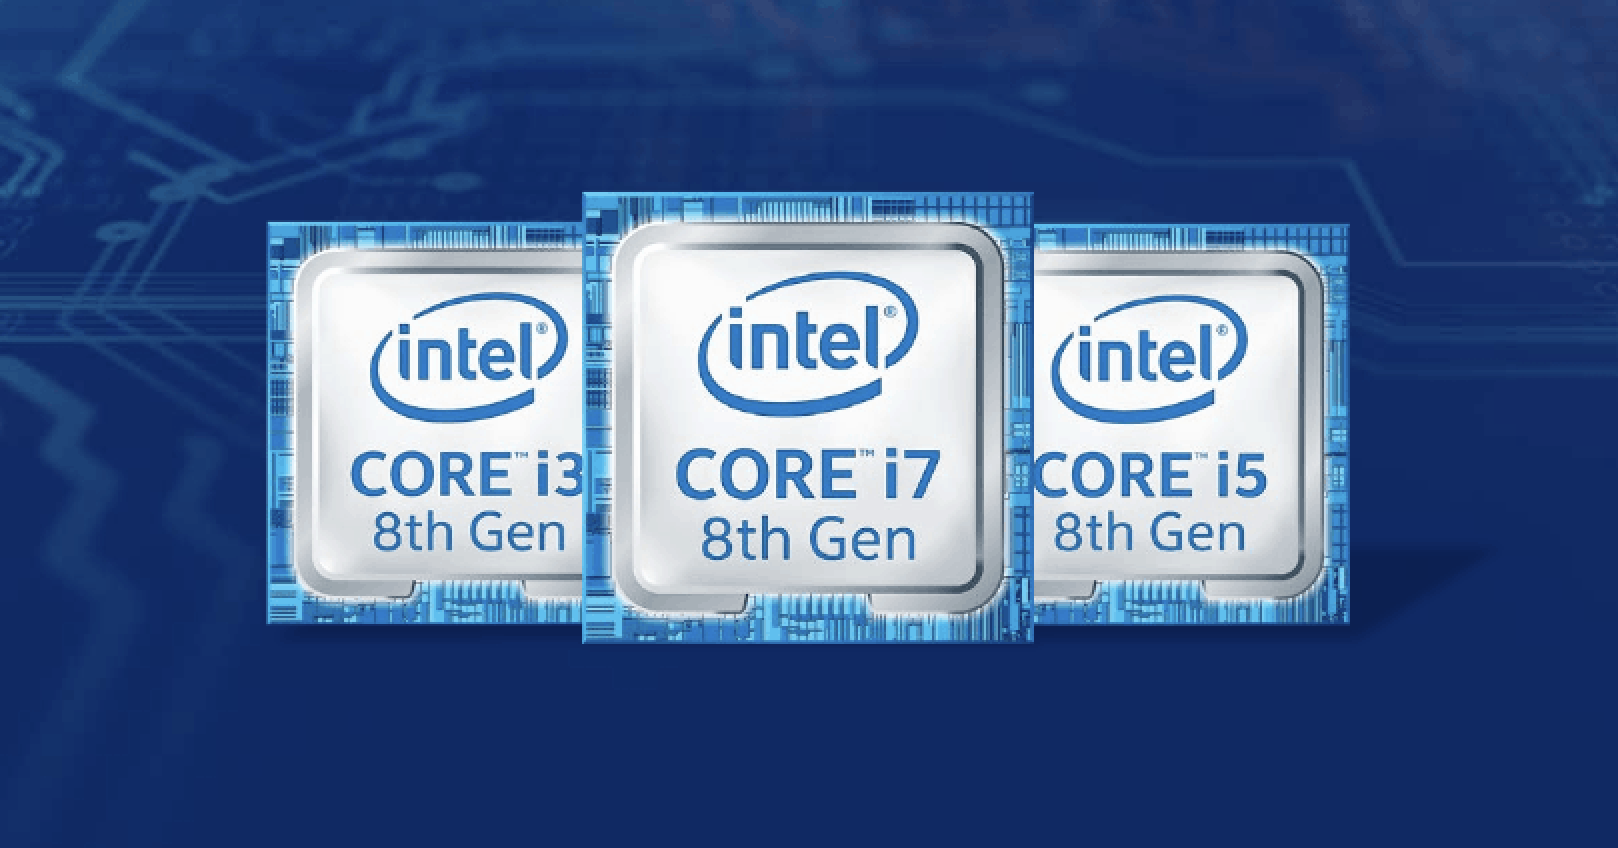 Intel plans to patch 90% of processors from past 5 years by the end of next week - OnMSFT.com - January 4, 2018